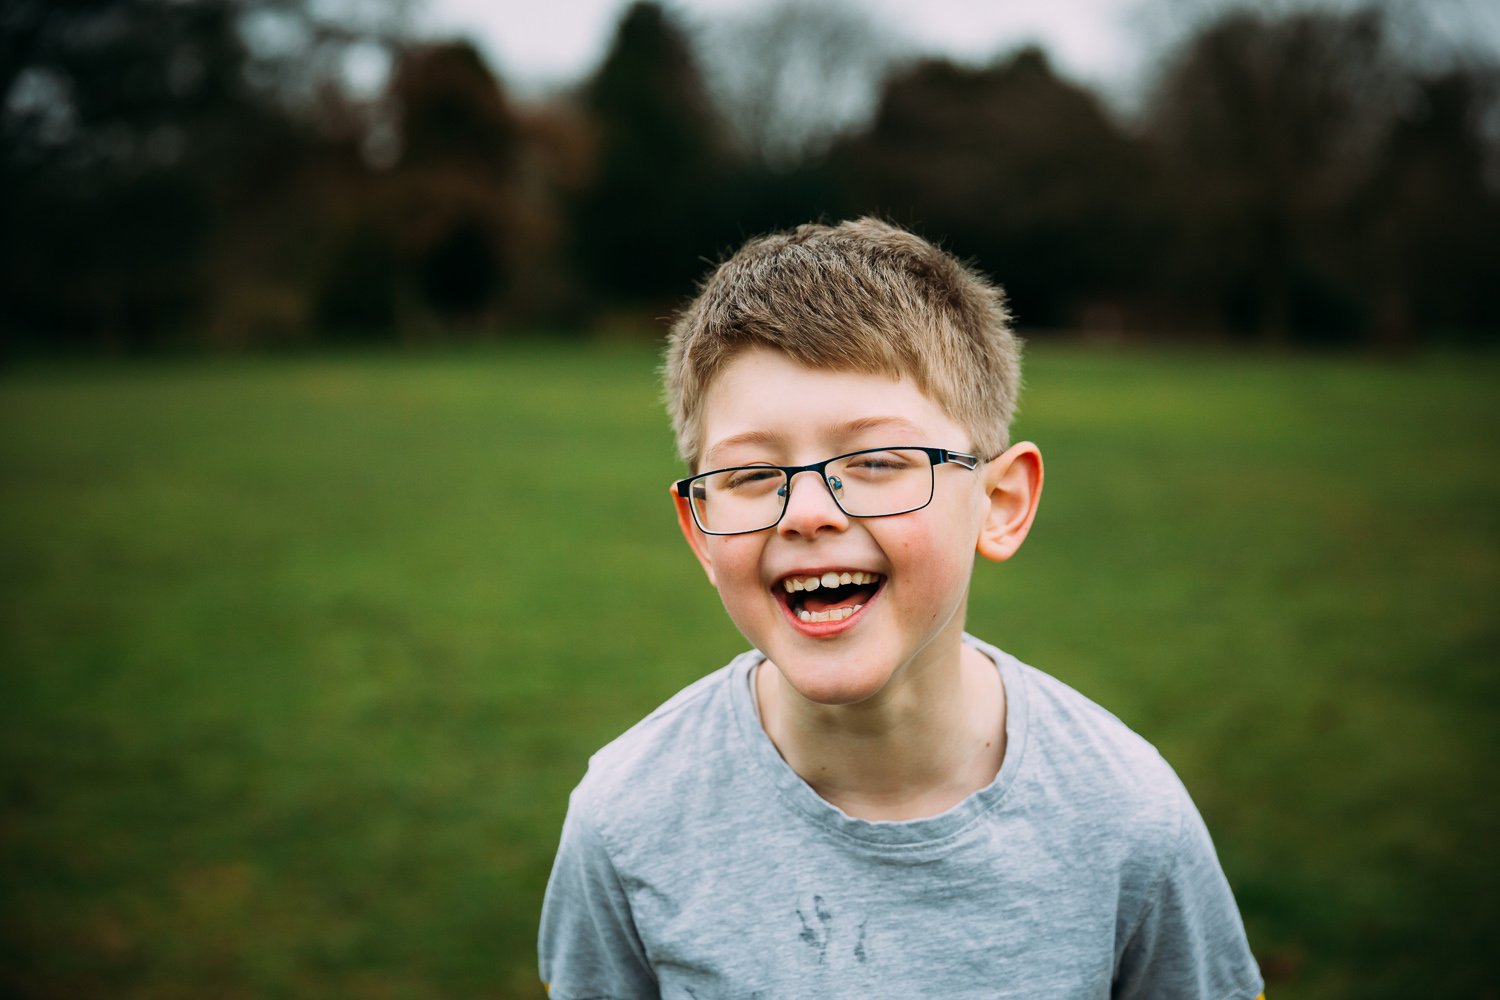 Wimbledon Family Photographer captures boy laughing in a park